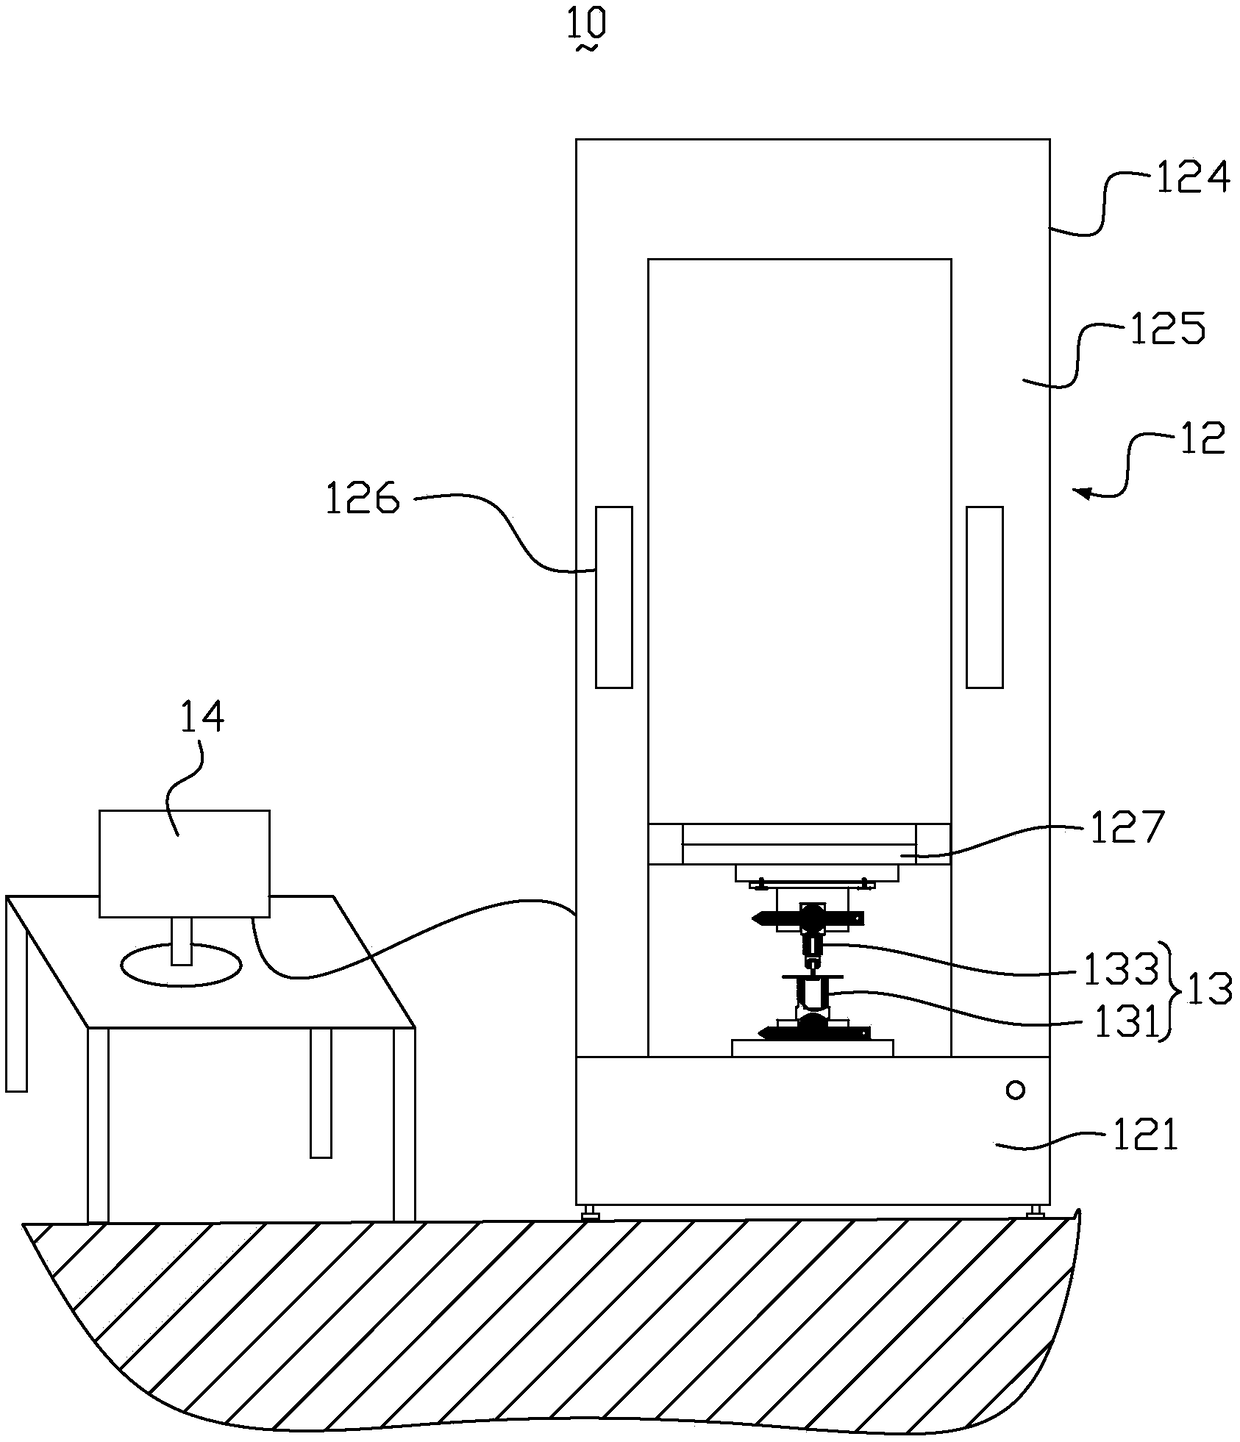 Apparatus and method for testing the welding strength of bolts and nuts